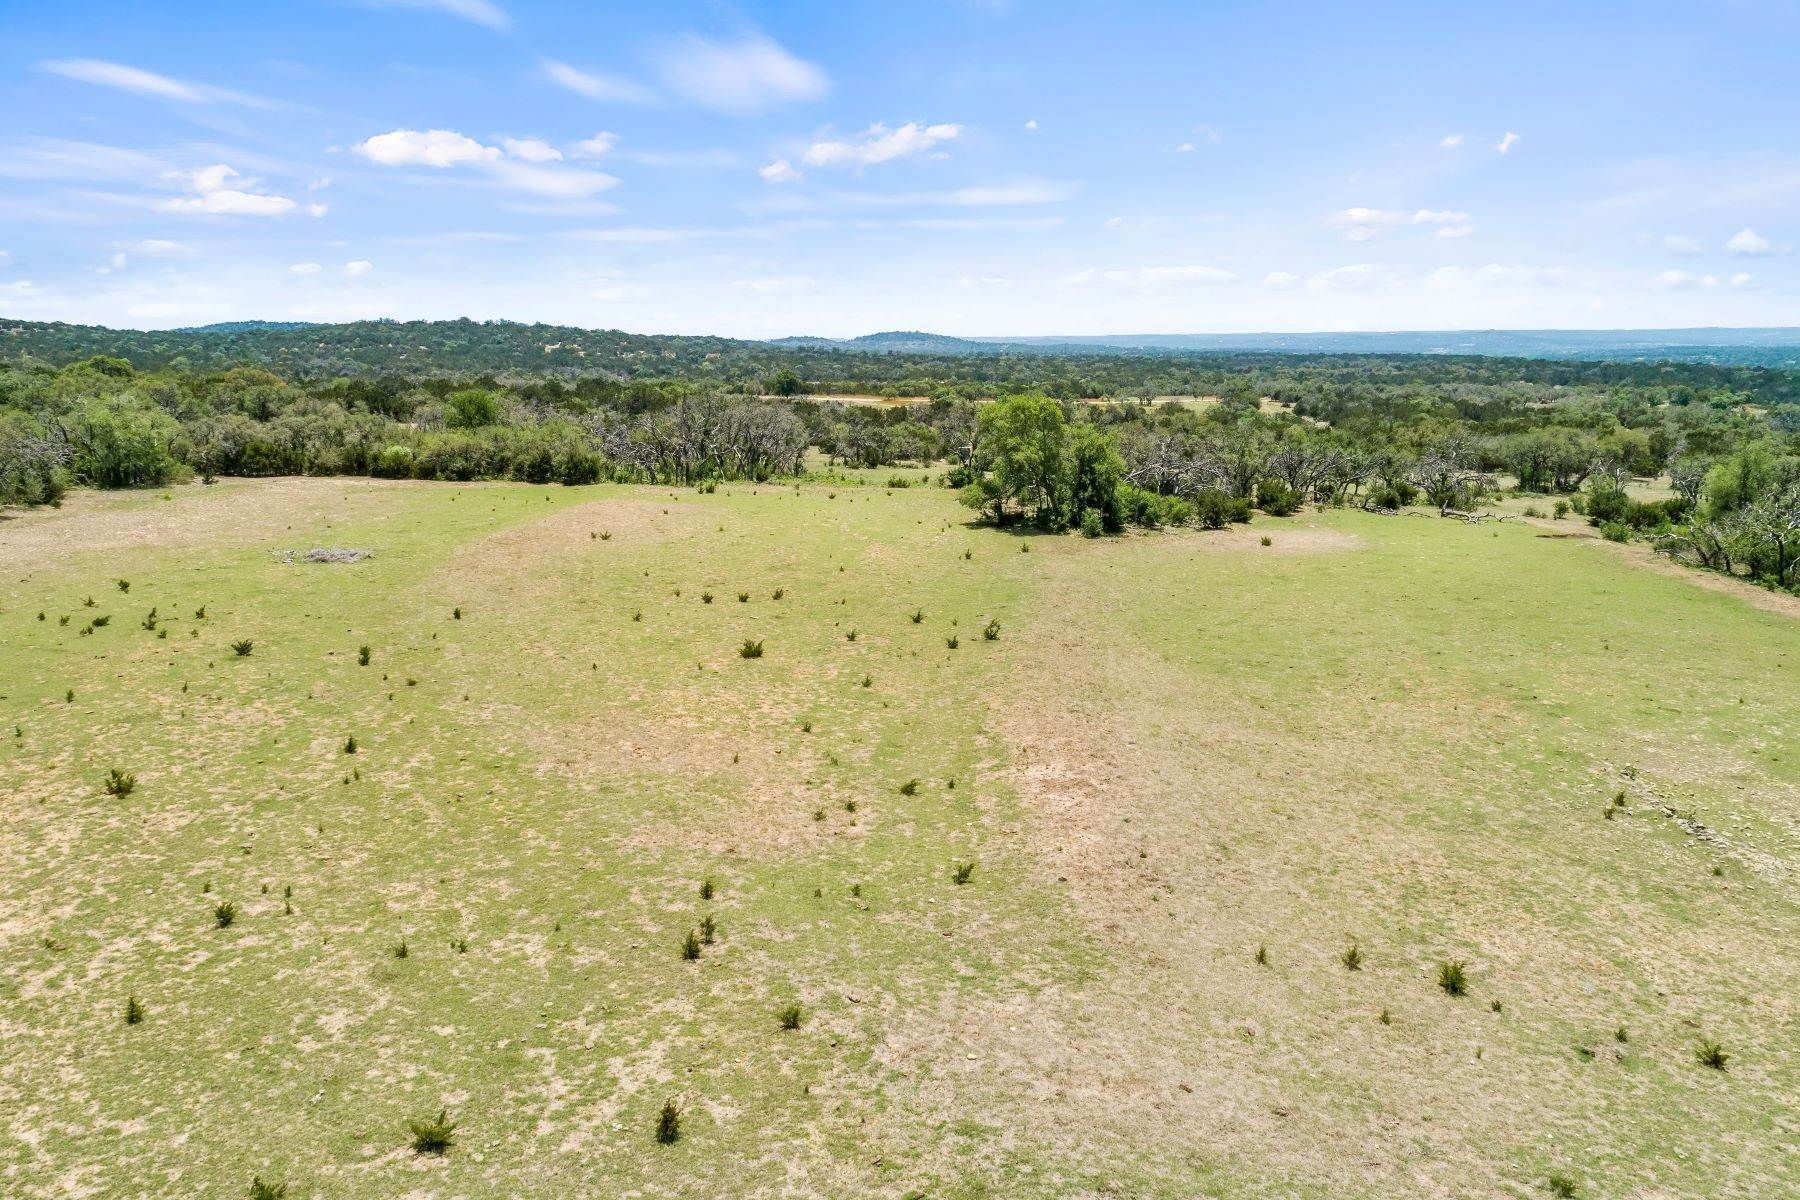 20. Farm and Ranch Properties at 319 Old No 9 Highway Comfort, Texas 78013 United States